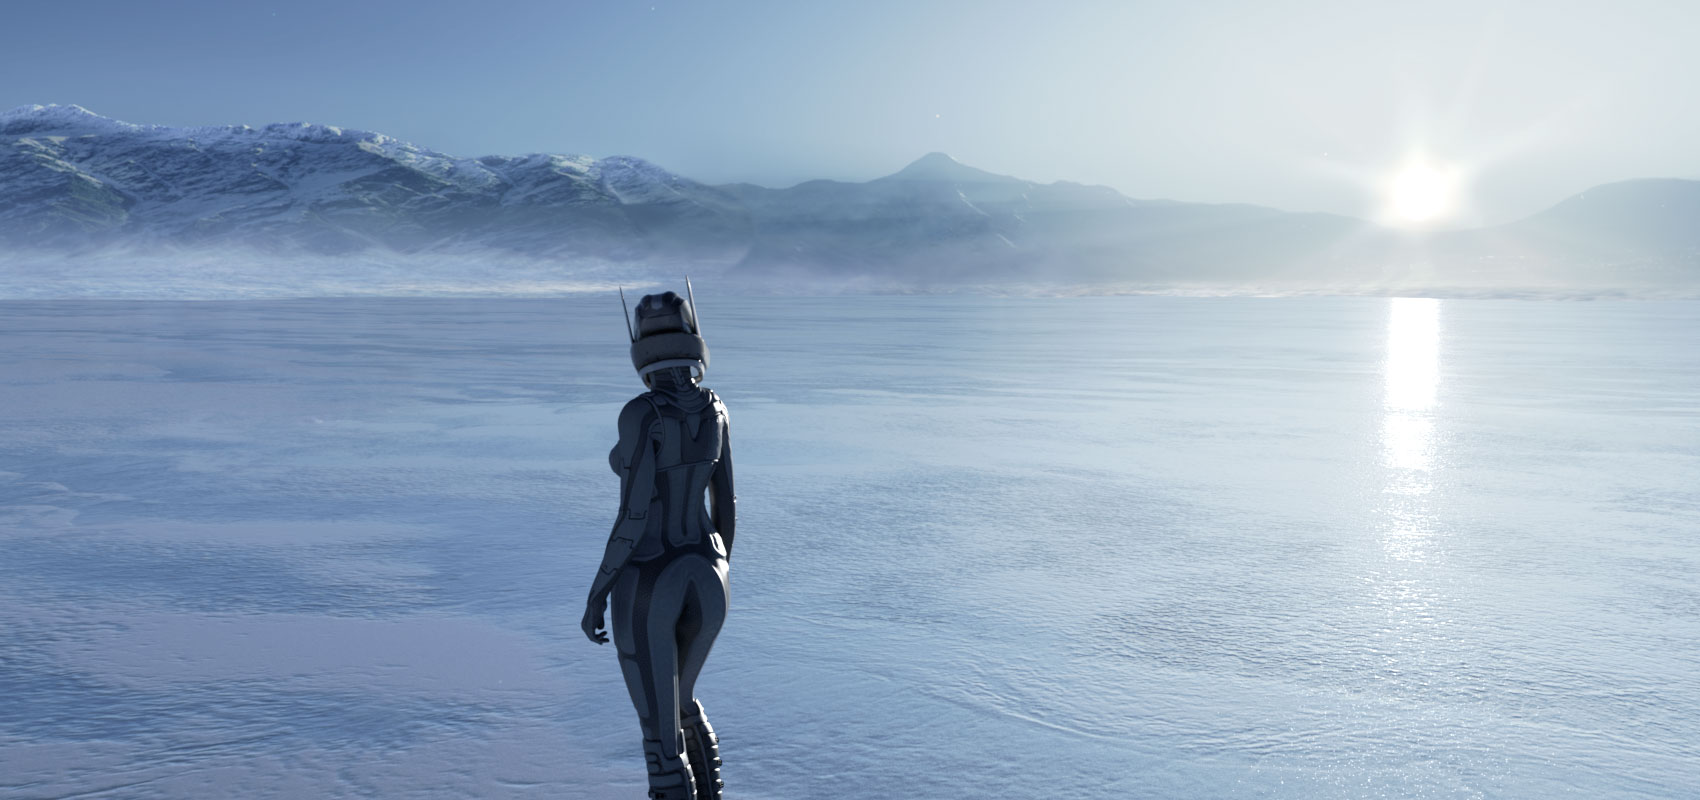 Frozen World - Icy Lake and Iray HDRI by: Aako, 3D Models by Daz 3D